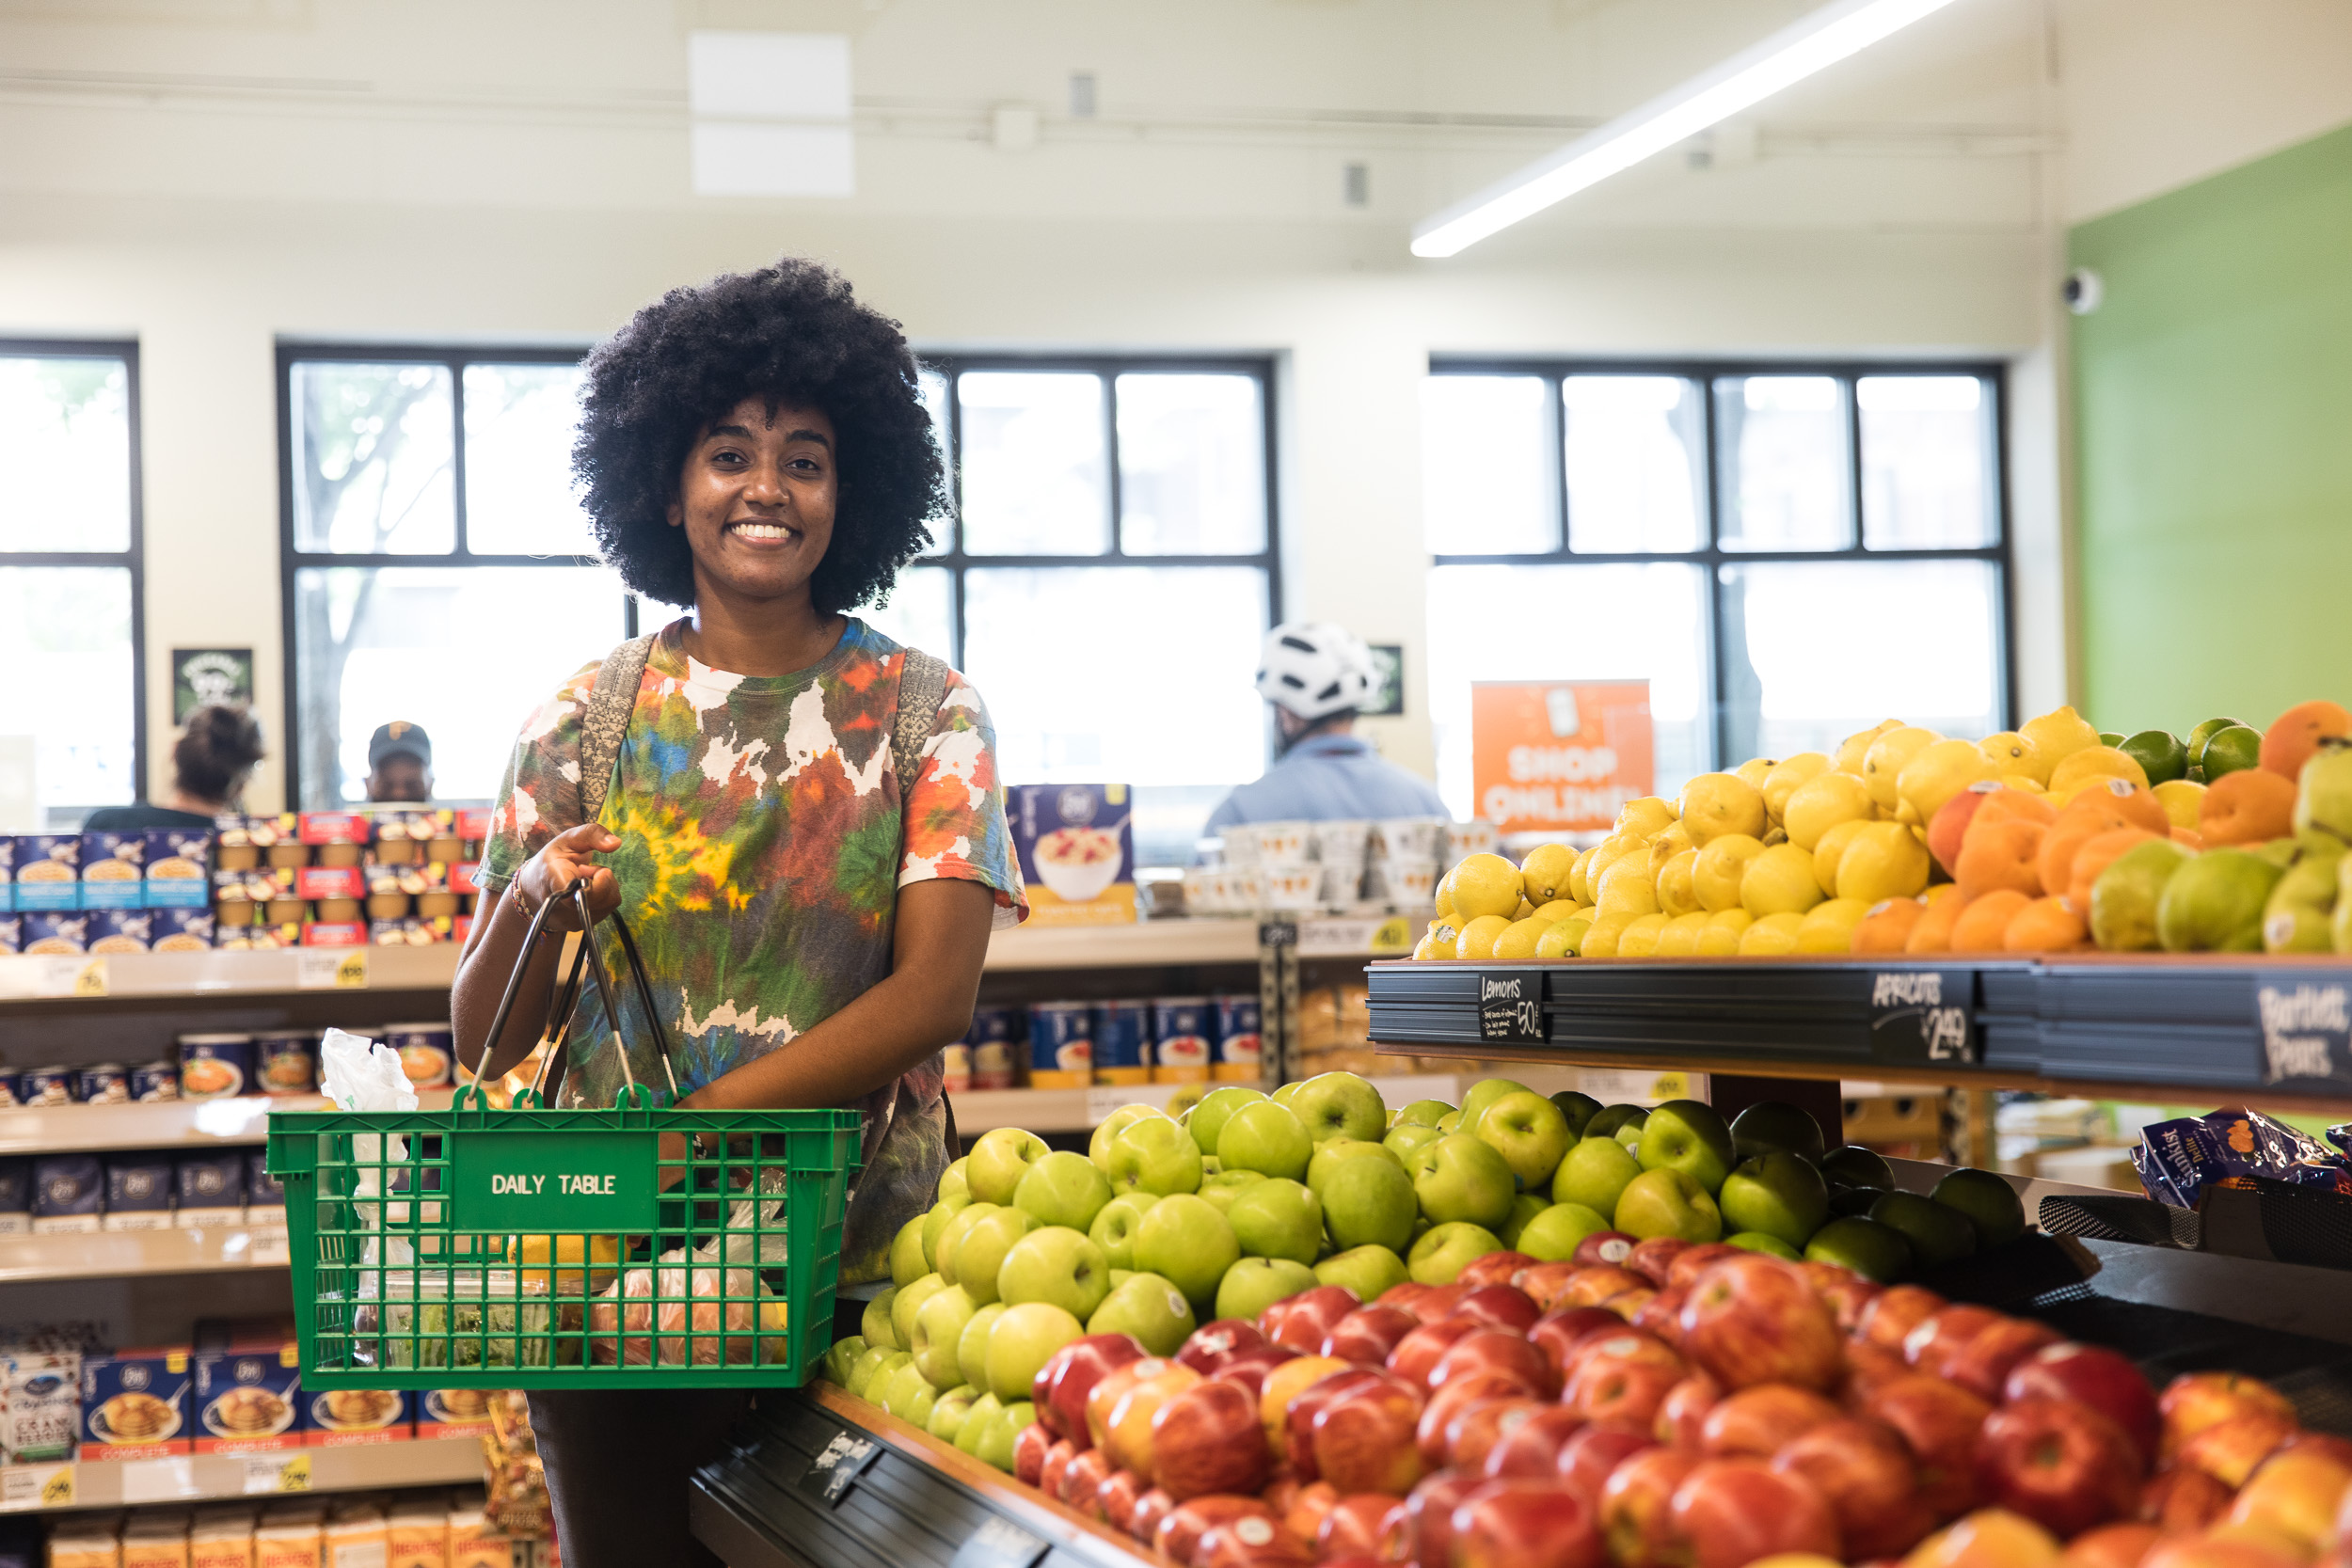 A Black woman with a colourful shirt is smiling at the camera while standing amongst produce at a grocery store